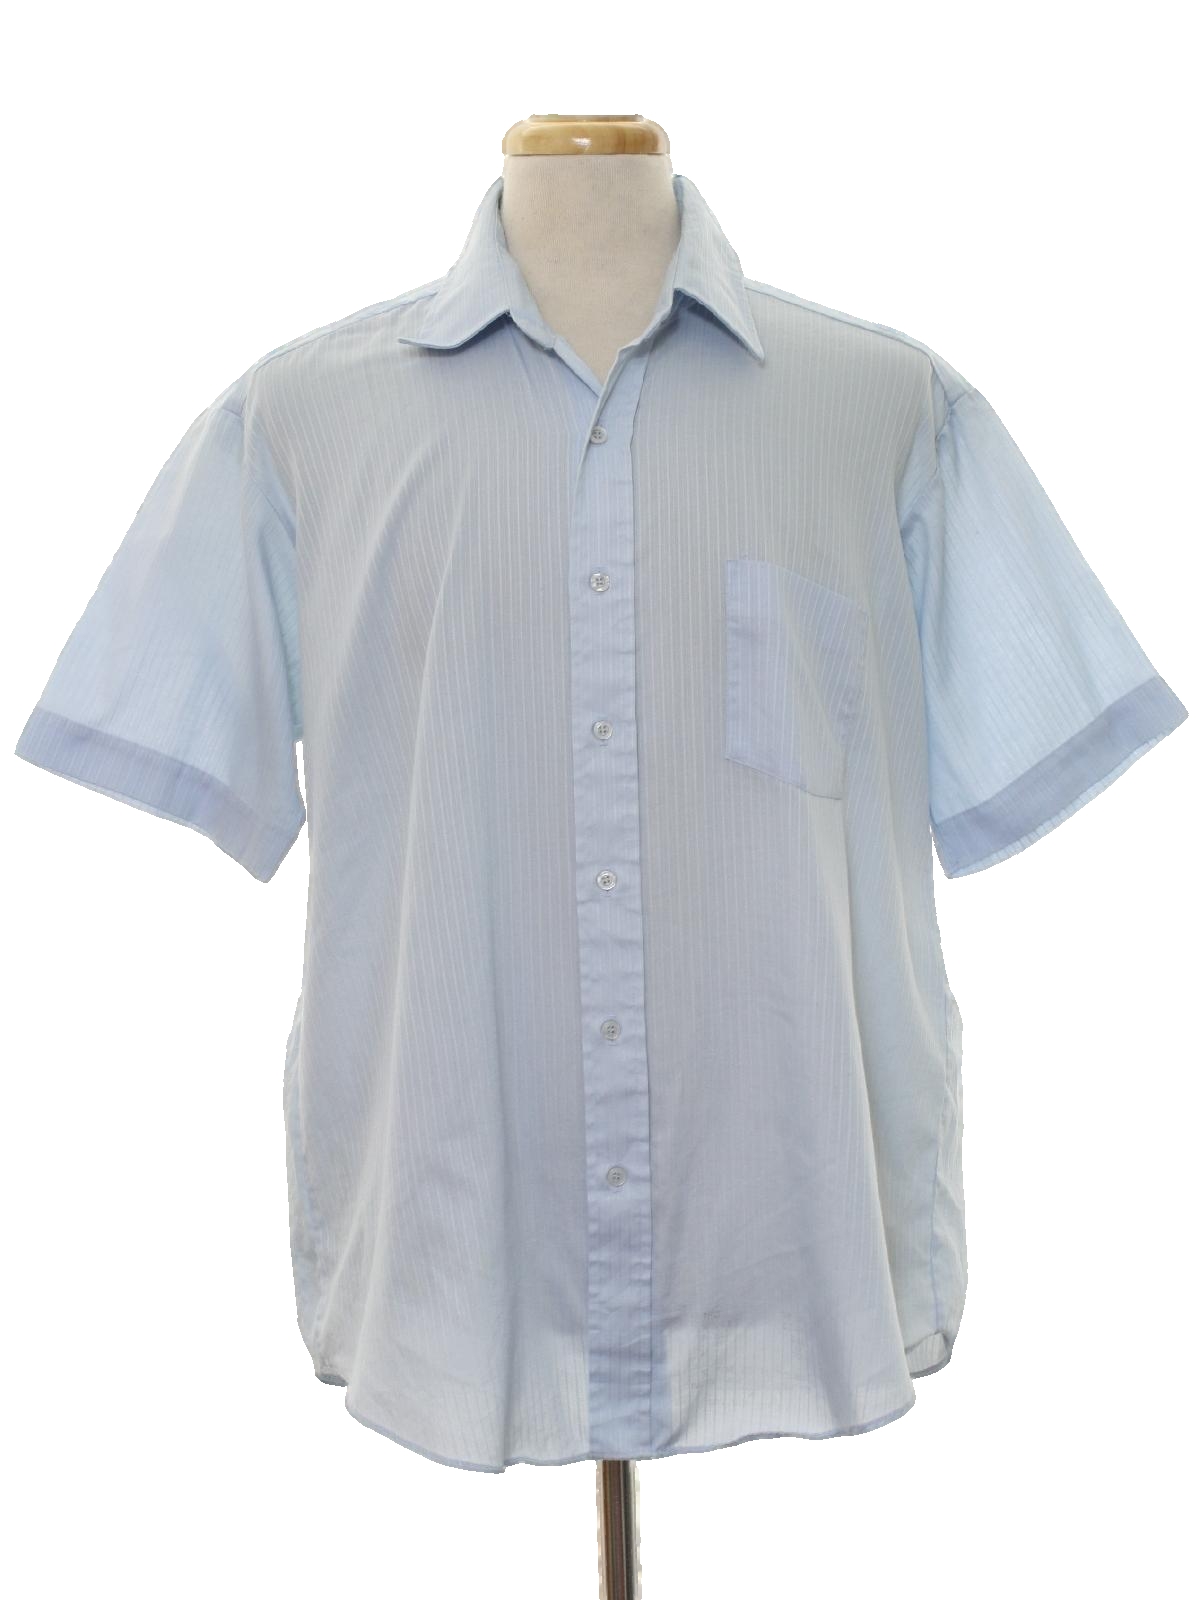 1970s Sears Shirt: Late 70s or Early 80s -Sears- Mens powder blue ...